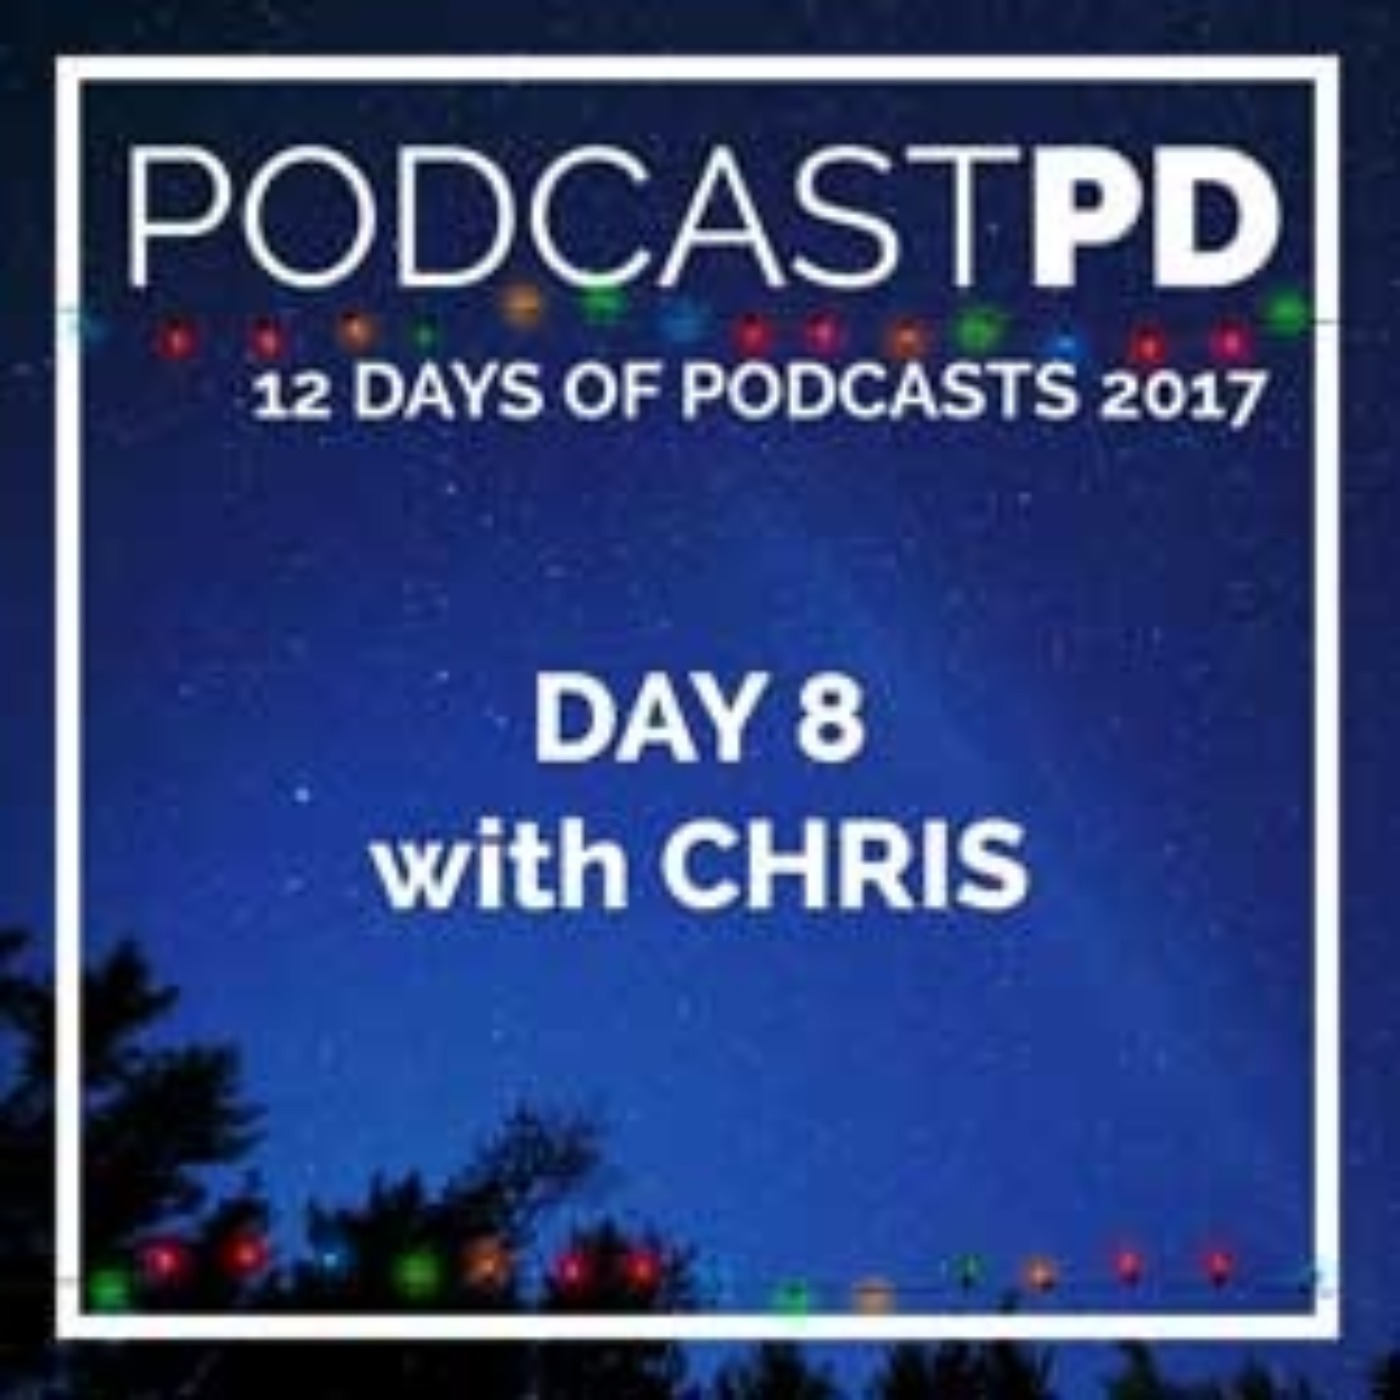 12 Days of Podcasts: ESPN 30 for 30 Image